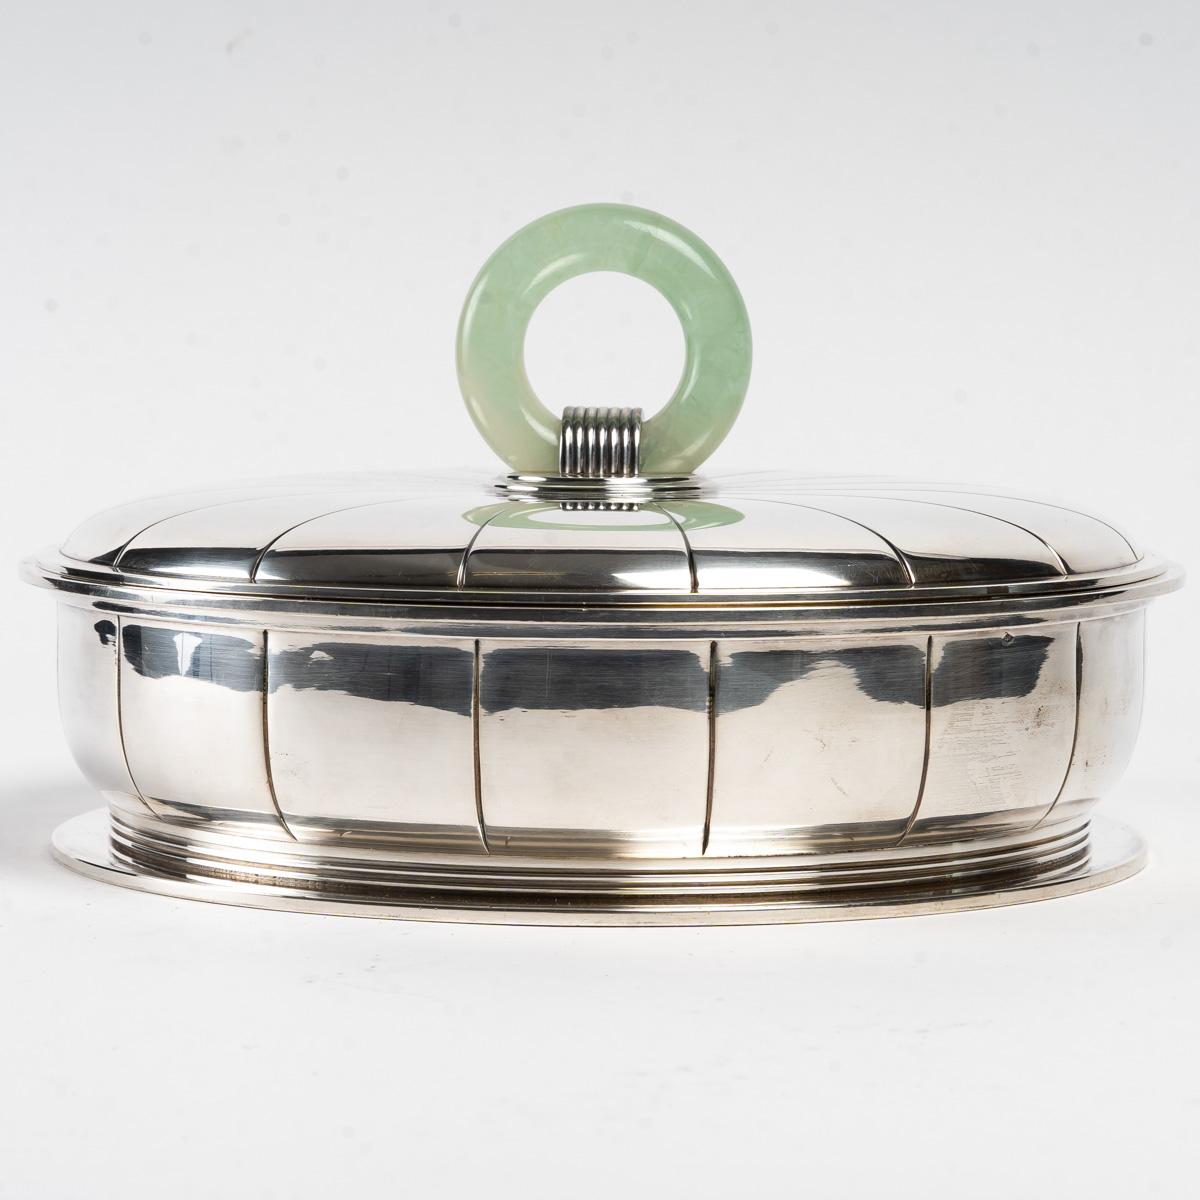 Turteen box centerpiece with removable three-part divider in sterling pure silver with jadeite ring finial by Jean Puiforcat.
The base, the cover and the divider are all made in sterling pure silver French Mercure 950/1000 stamp and marked with the